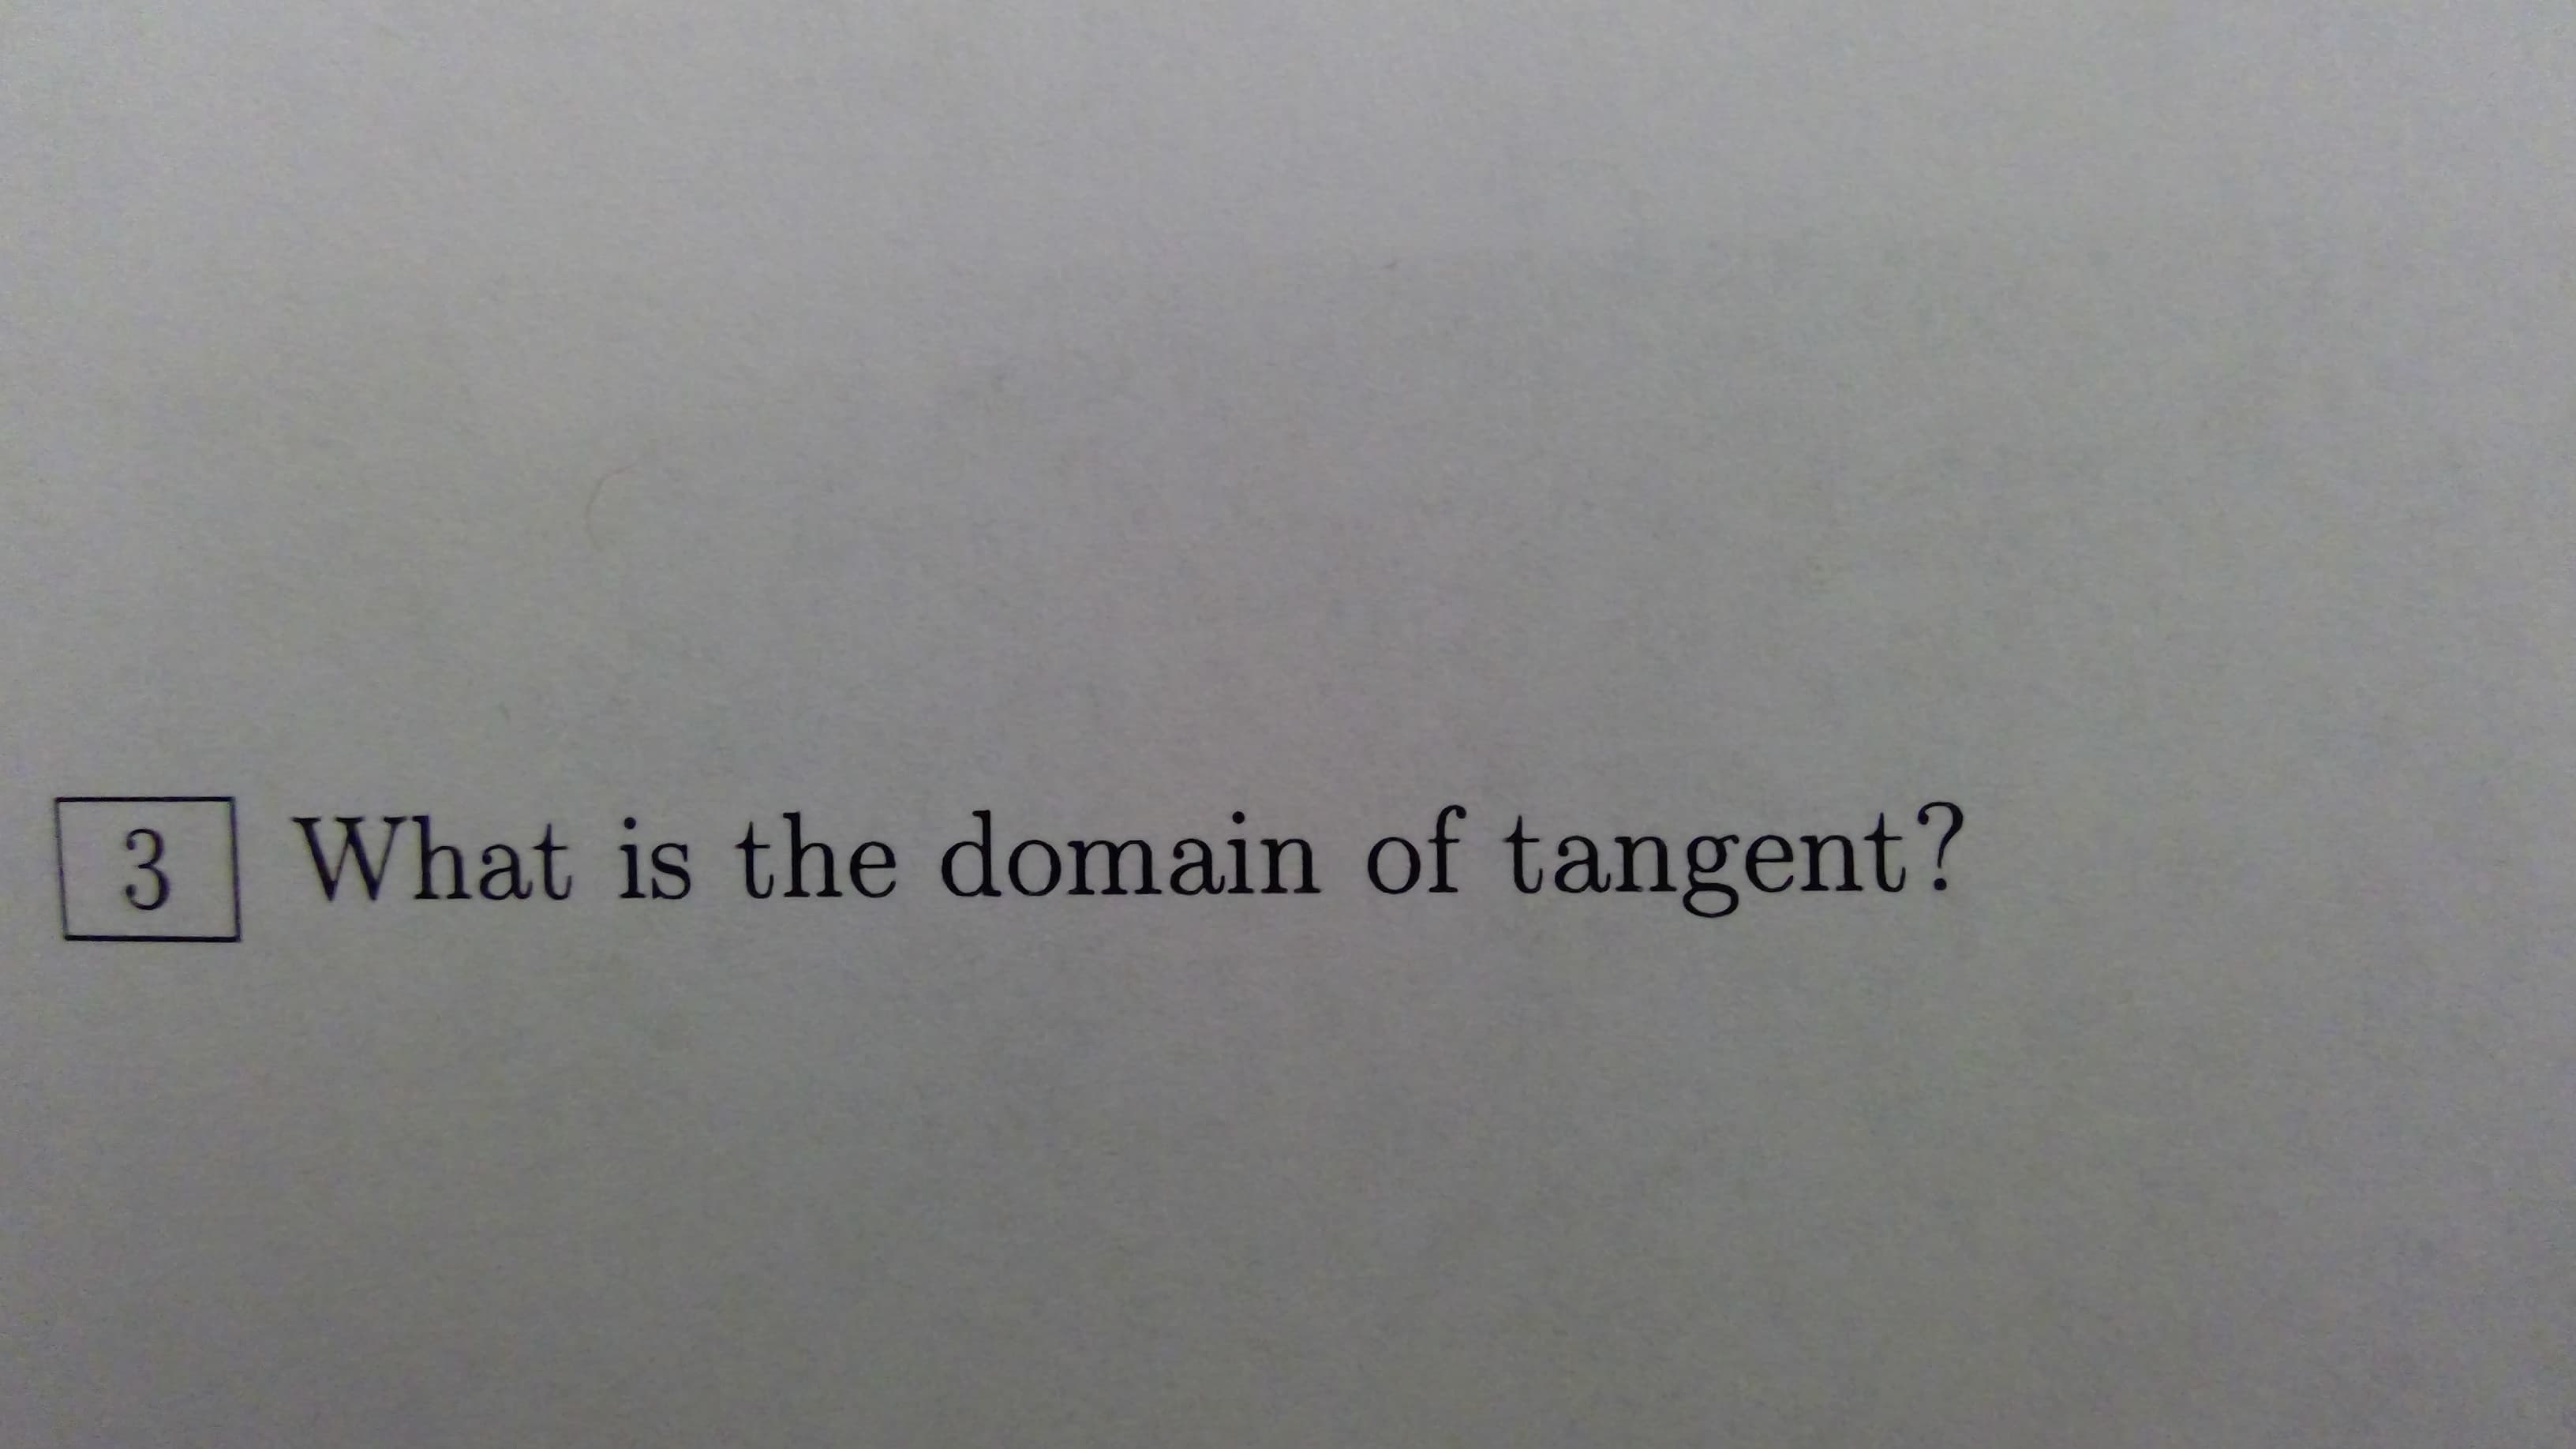 3 What is the domain of tangent?
